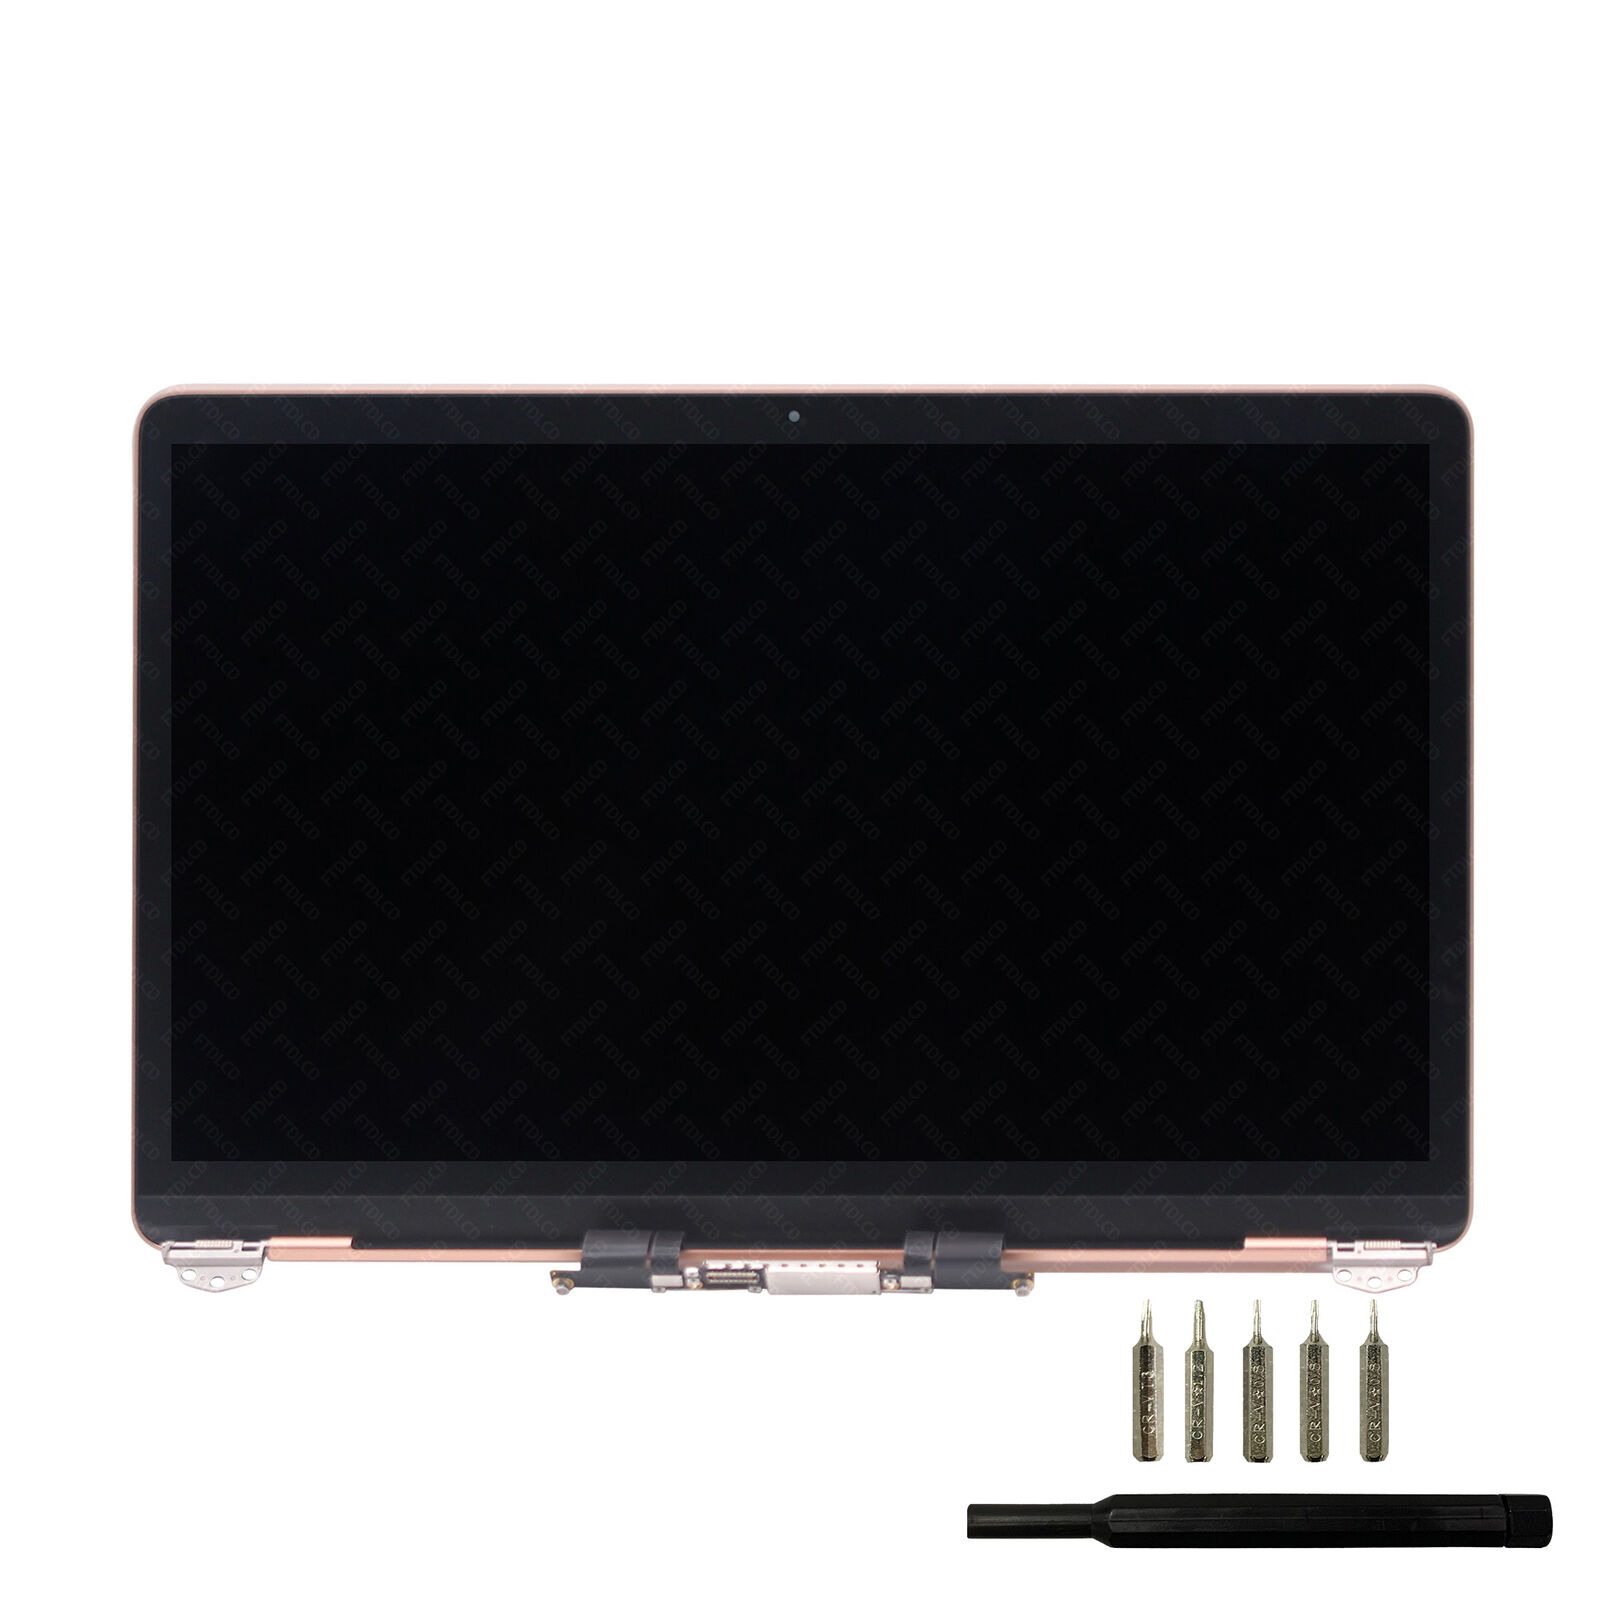 New For MacBook Air A1932 Inc EMC 3184 Display Laptop Screen Assembly Grade A+